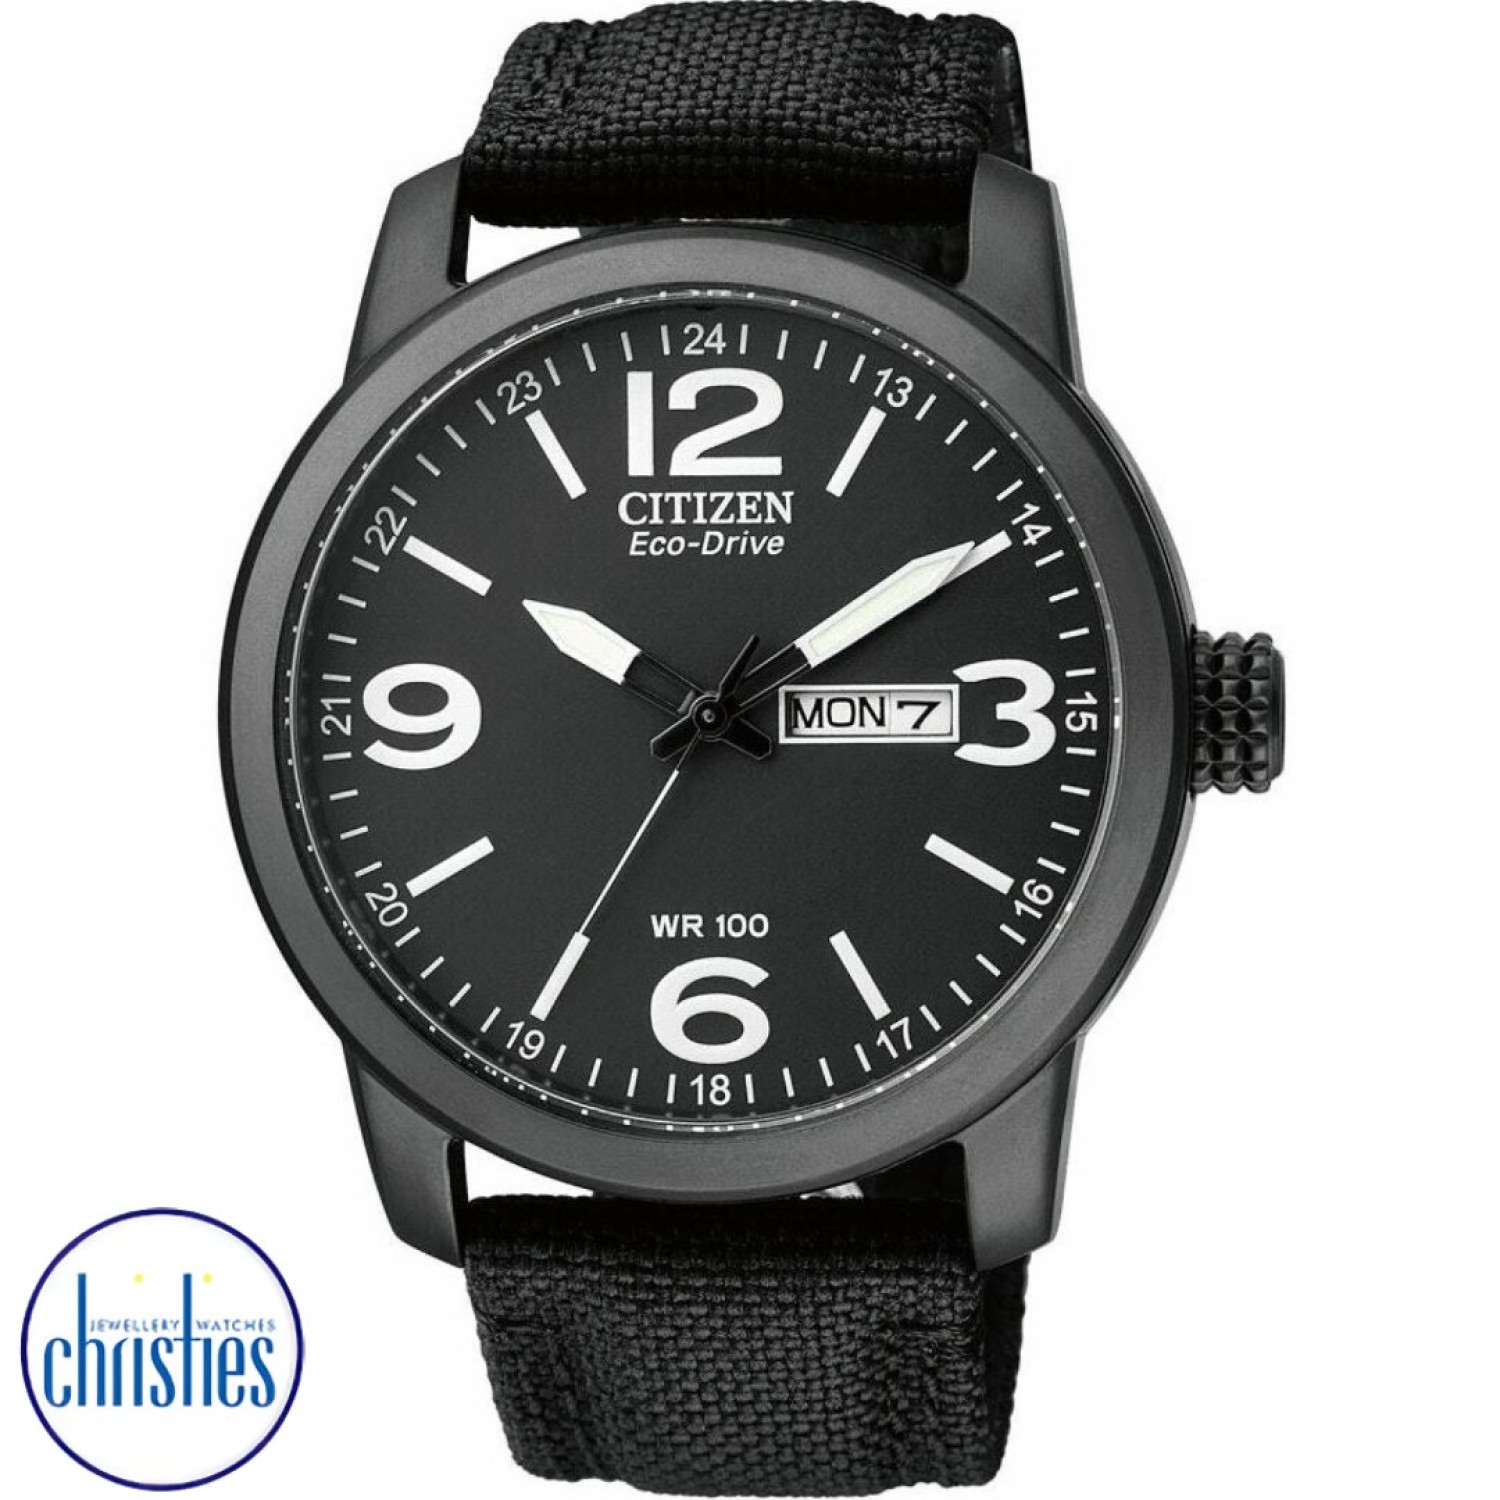 BM8475-34E Citizen Mens Eco-Drive. Powered by light so you never need to change a battery. The matt black dial of this timepiece displays bold white details and markings to create an eye-catching appearance. The slim, black stainless steel casing neatly s